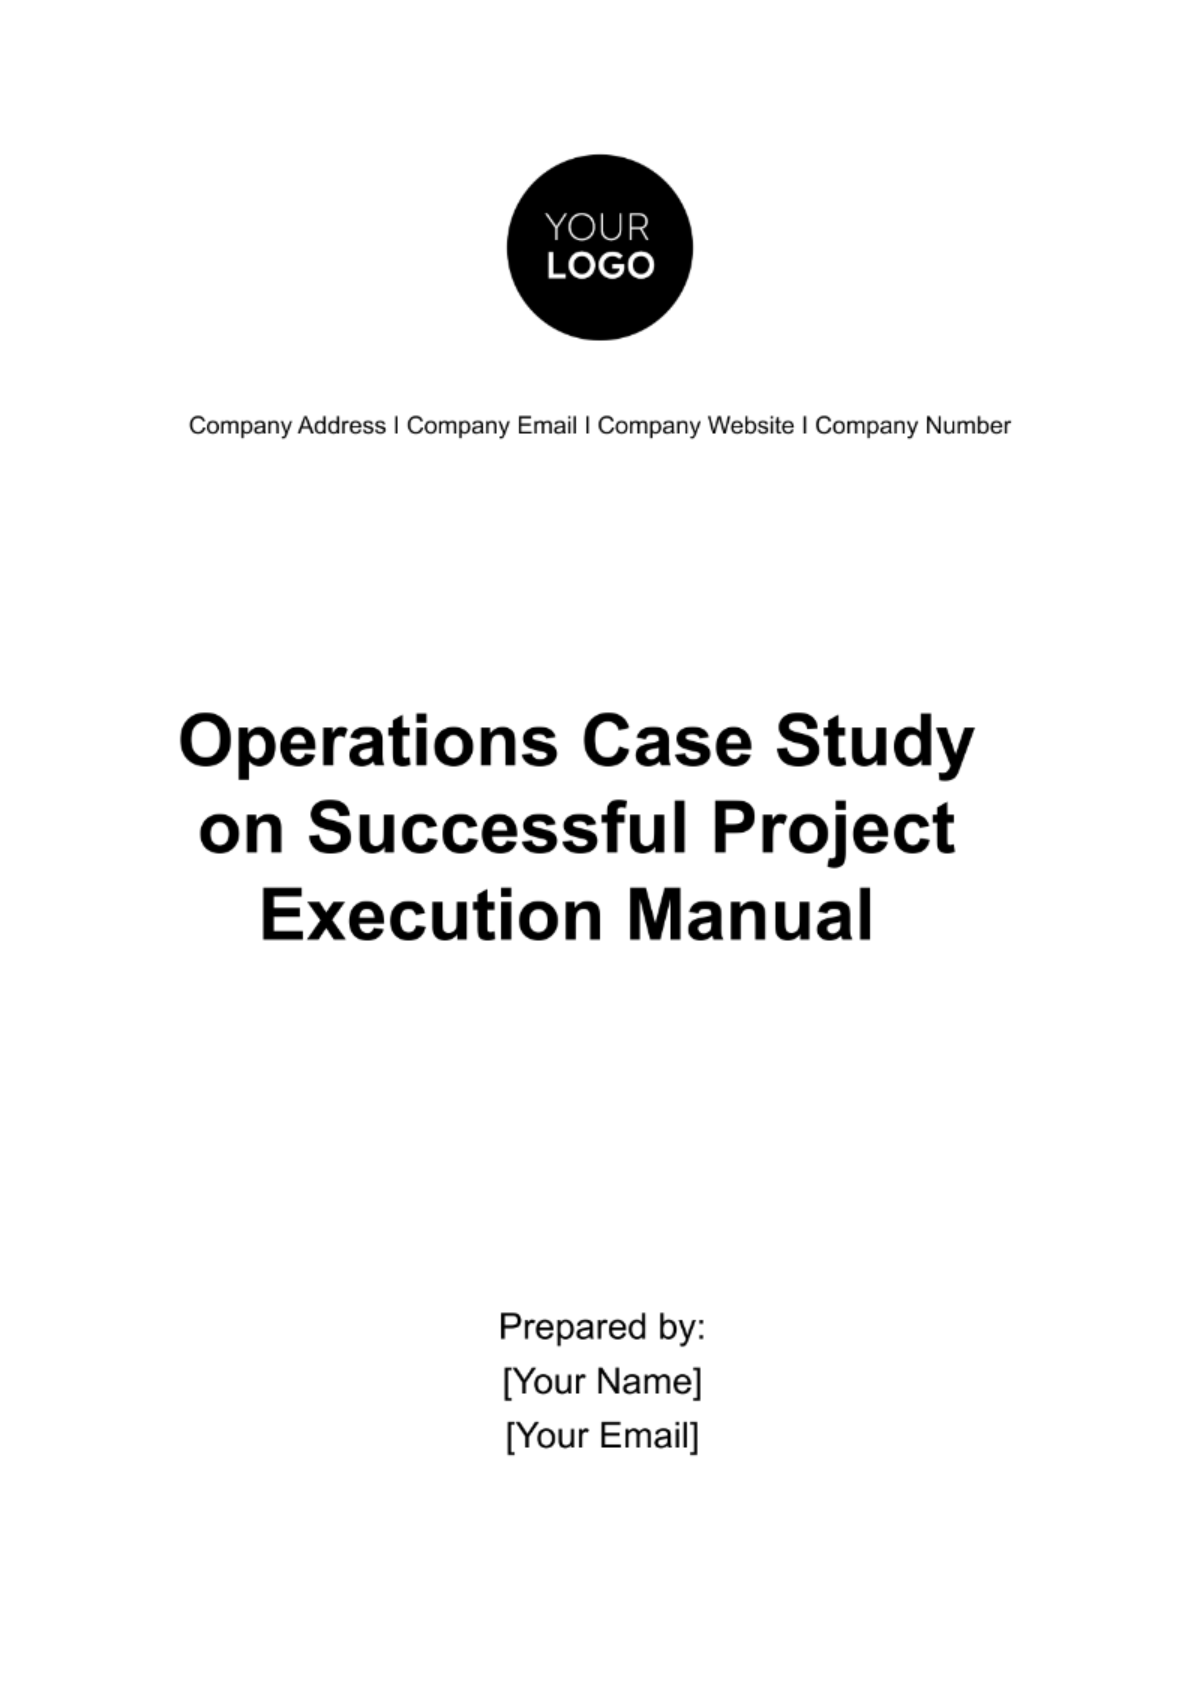 Free Operations Case Study on Successful Project Execution Manual Template